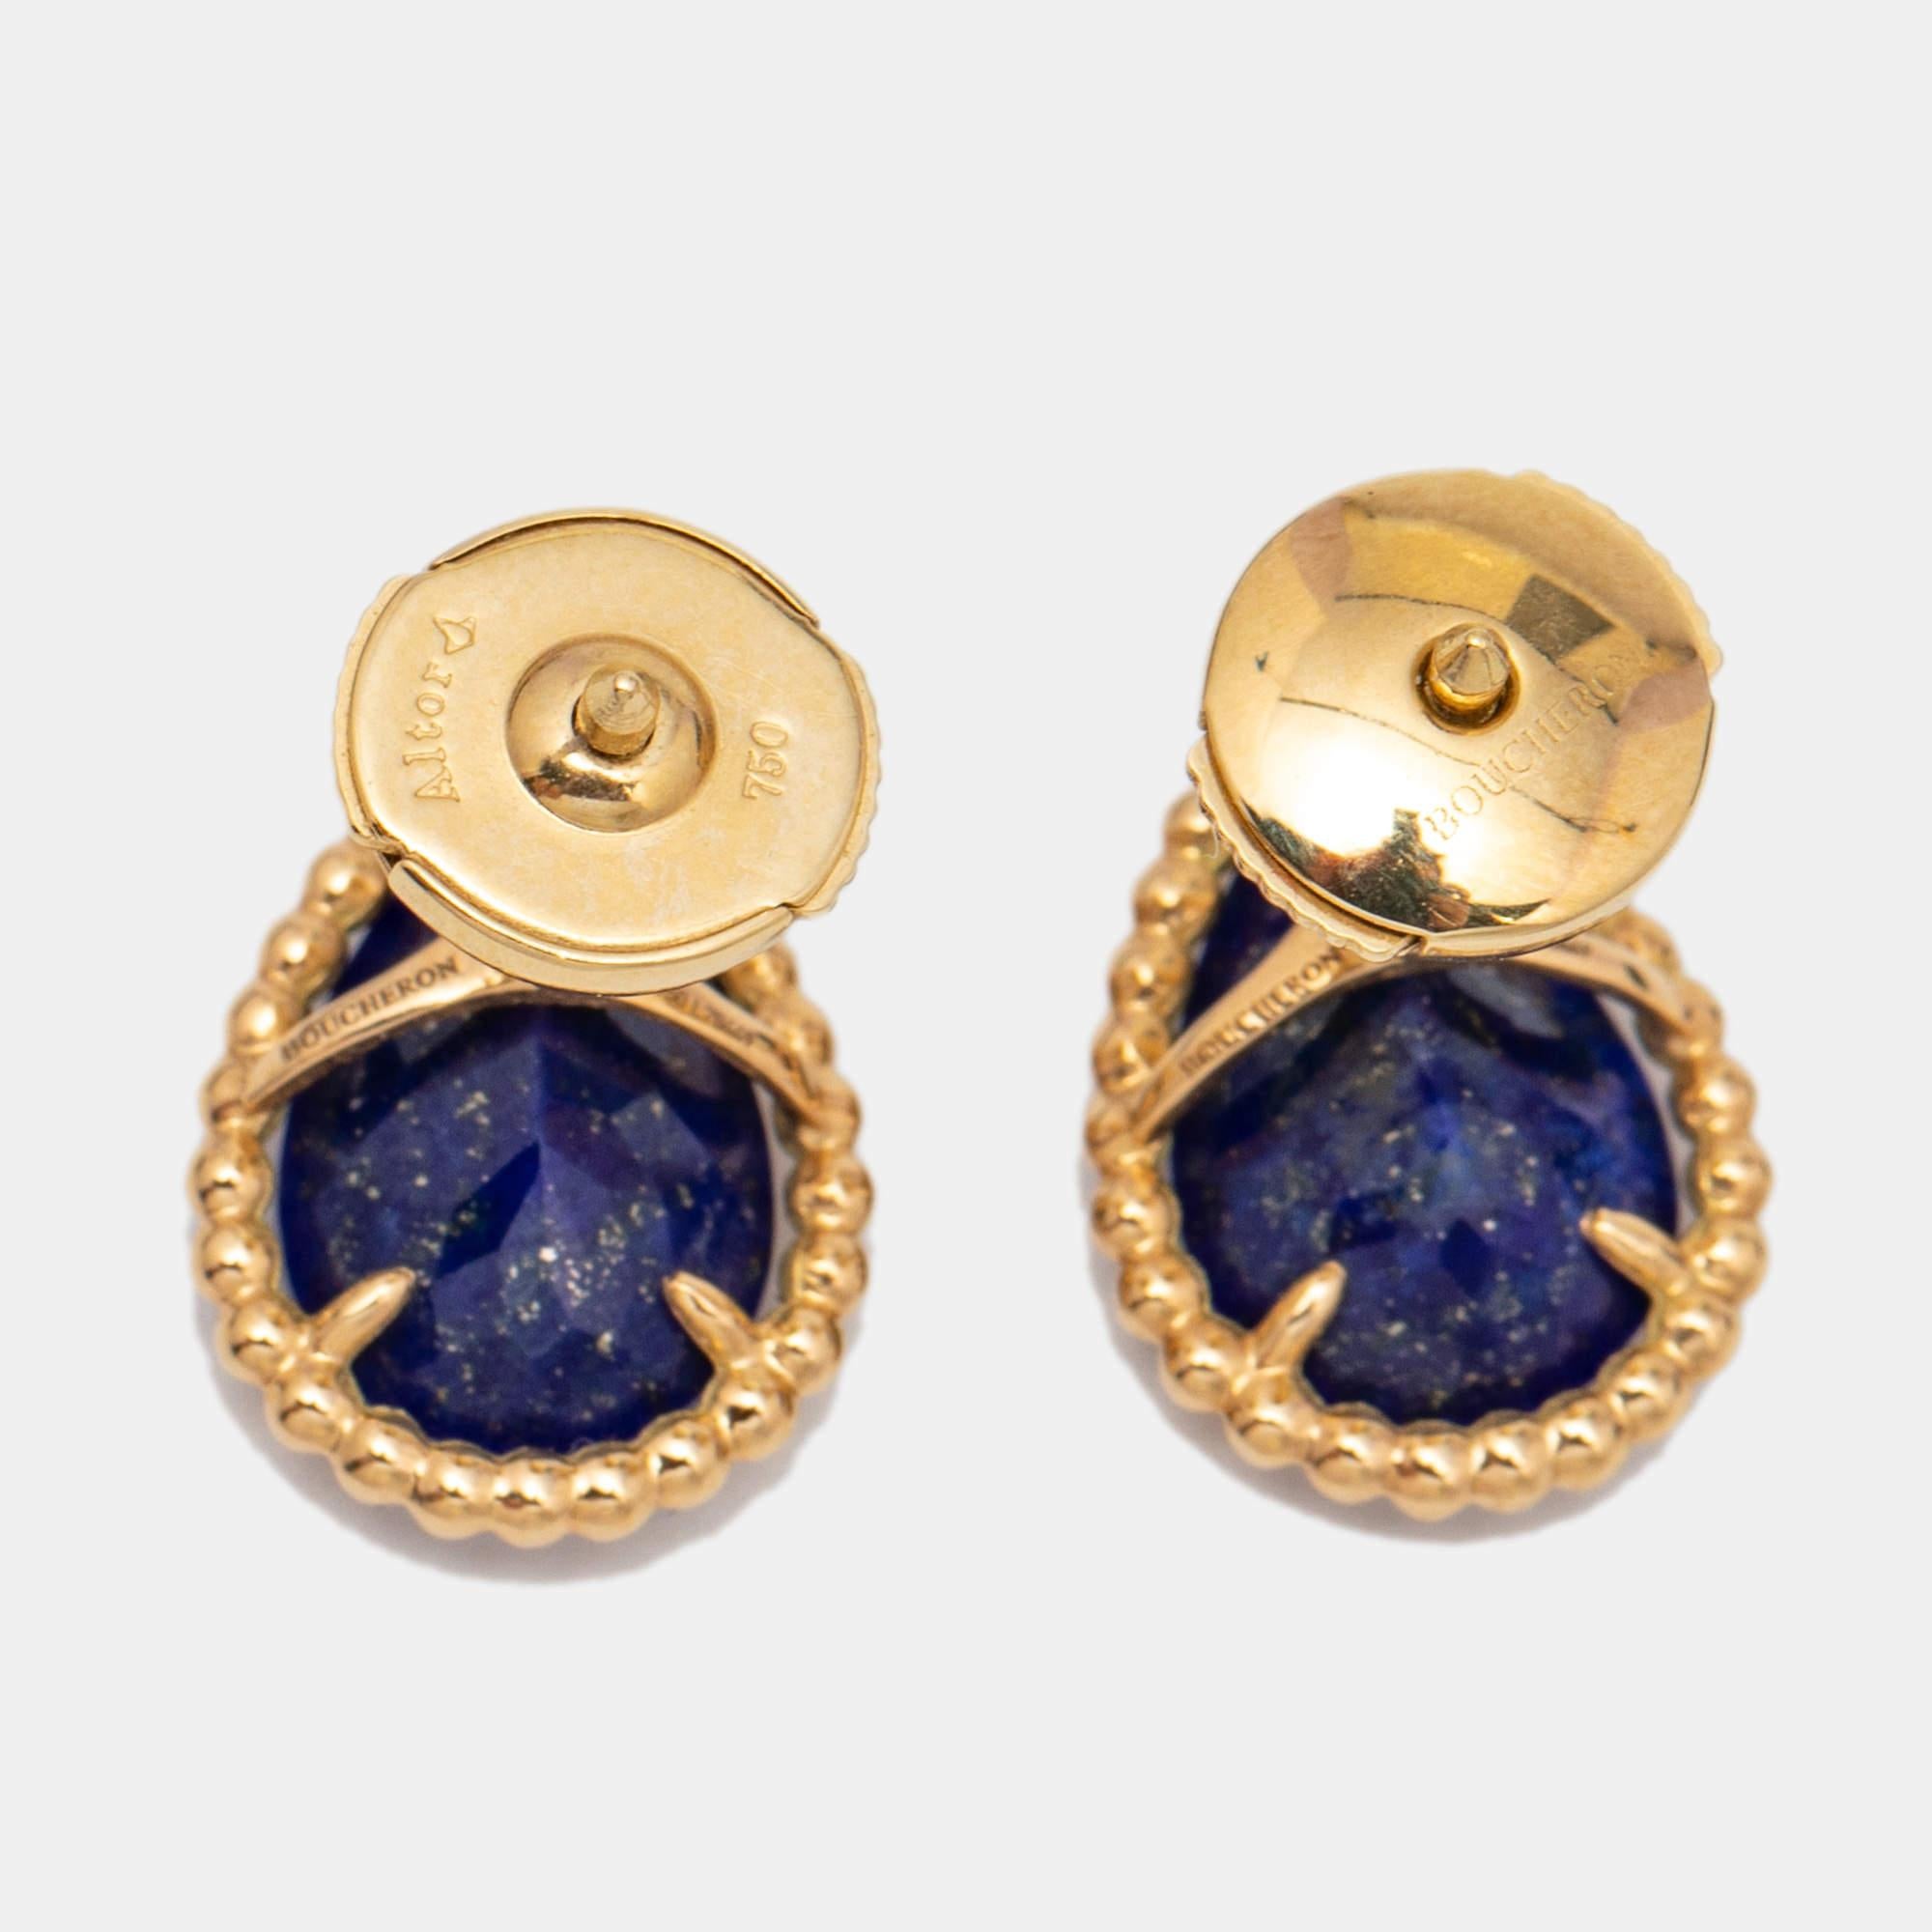 Boucheron's Serpent Boheme line from 1968 is a celebration of the house’s iconic serpent. The designs are defined by beaded borders and pear-shaped motifs. These earrings are crafted using 18k yellow gold and fitted with lapiz lazuli.

